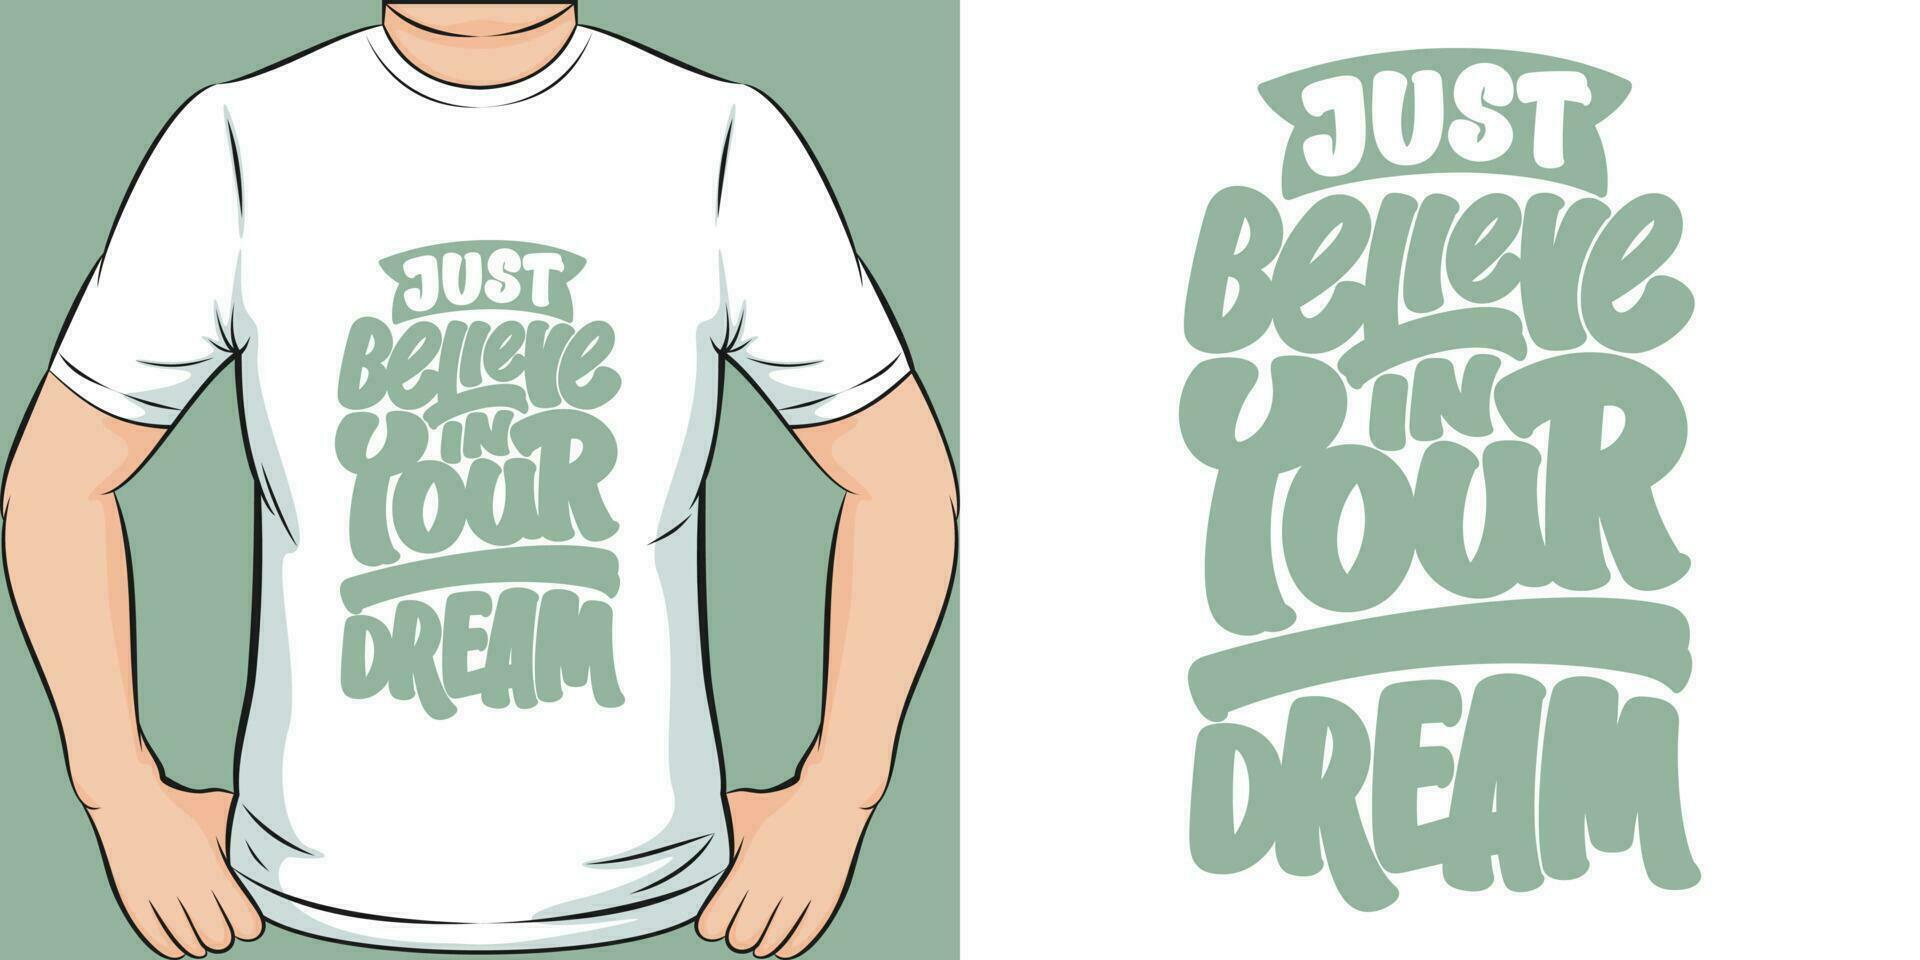 Just Believe in Your Dream, Motivational Quote T-Shirt Design. vector